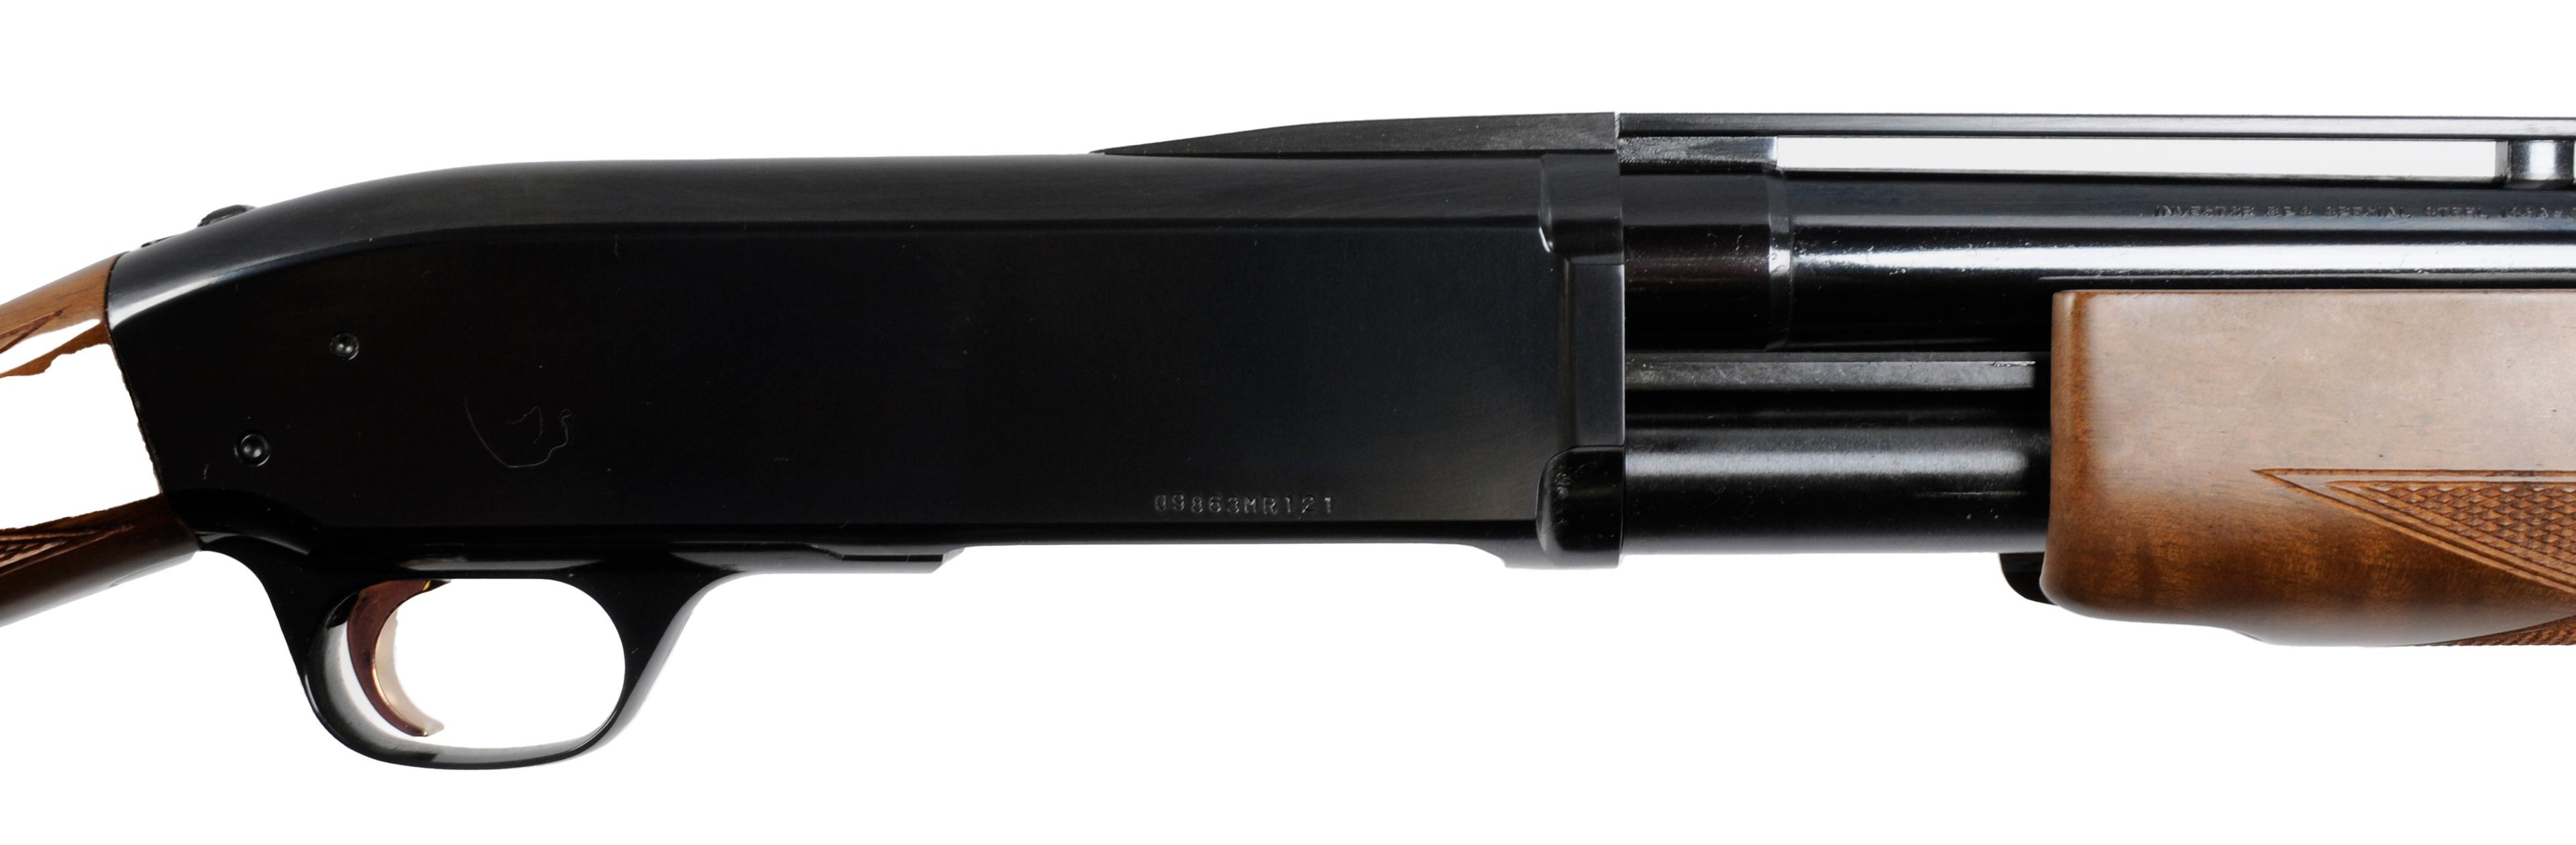 Browning BPS Invector Special Steel 16ga Bottom Eject Shotgun FFL Required 09863MR121 (PAG1)